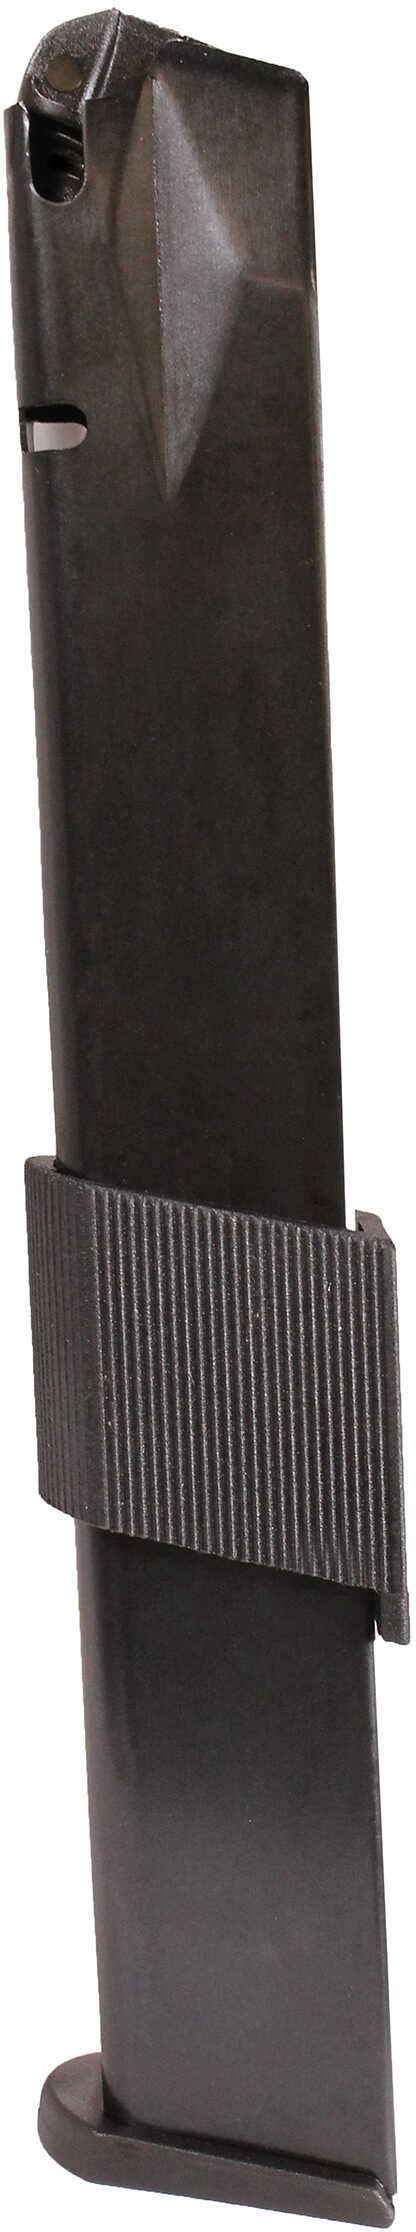 Promag Canik Tp9 Magazine 9mm 32 Rounds Blue Steel 11231549